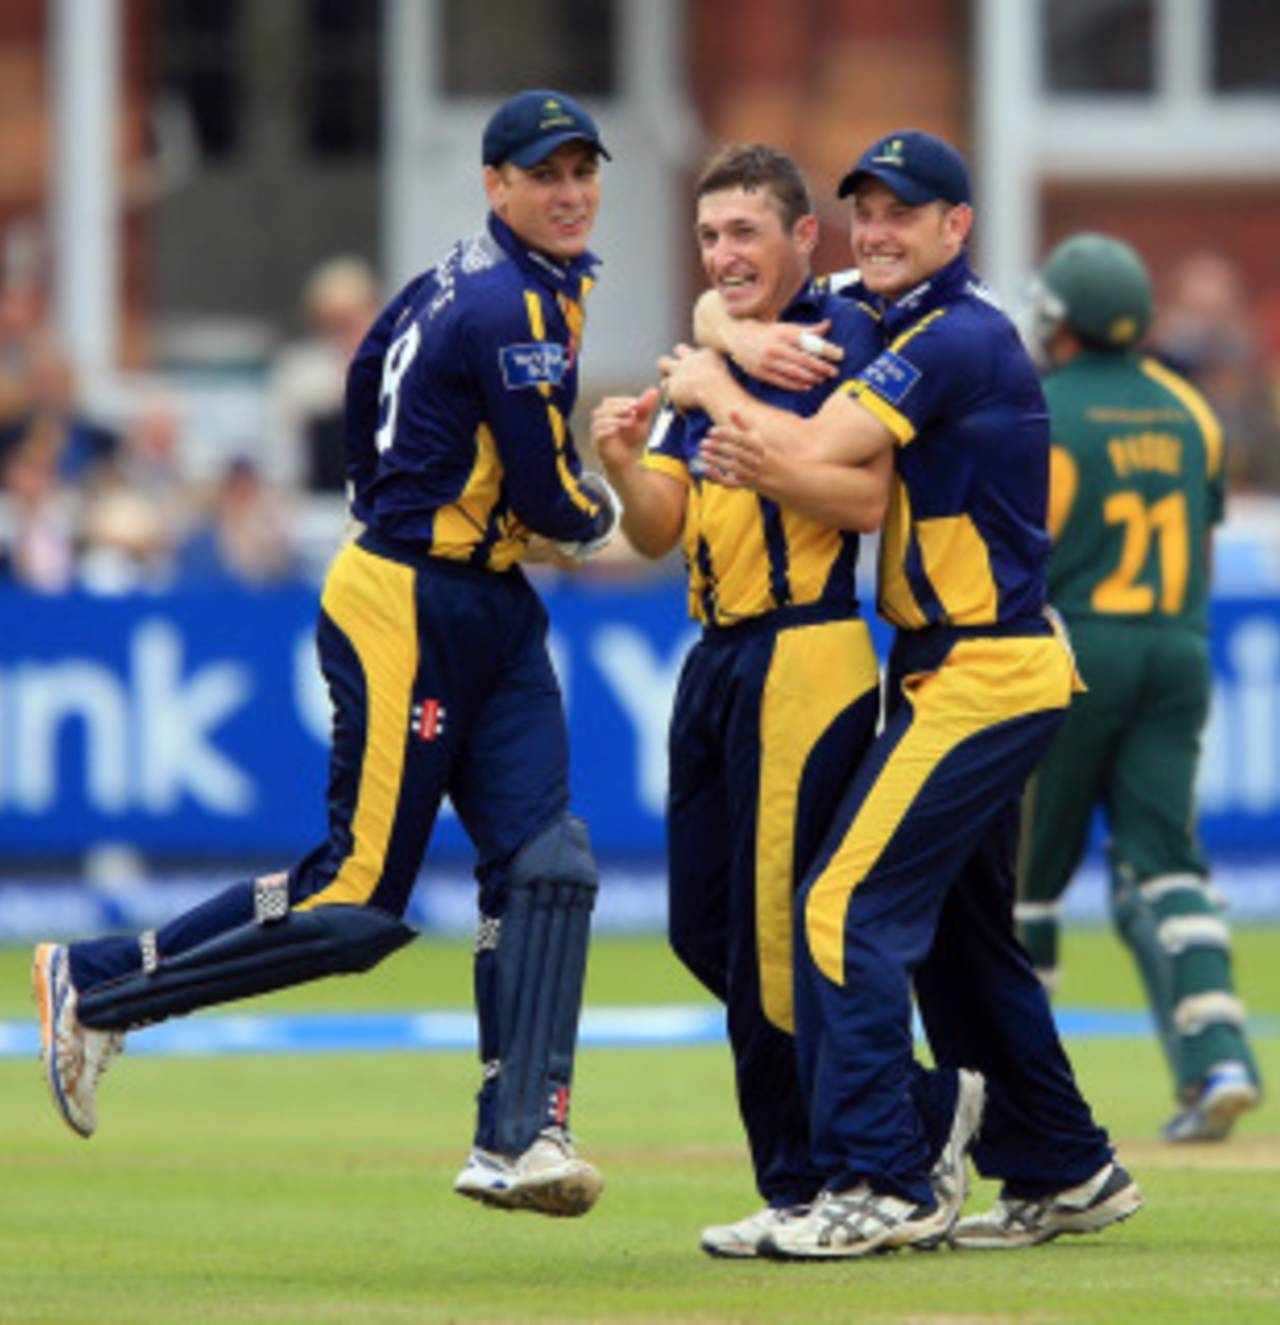 The 20-year-old offspinner Andrew Salter impressed at Lord's, Glamorgan v Nottinghamshire, YB40 final, Lord's, September 21, 2013